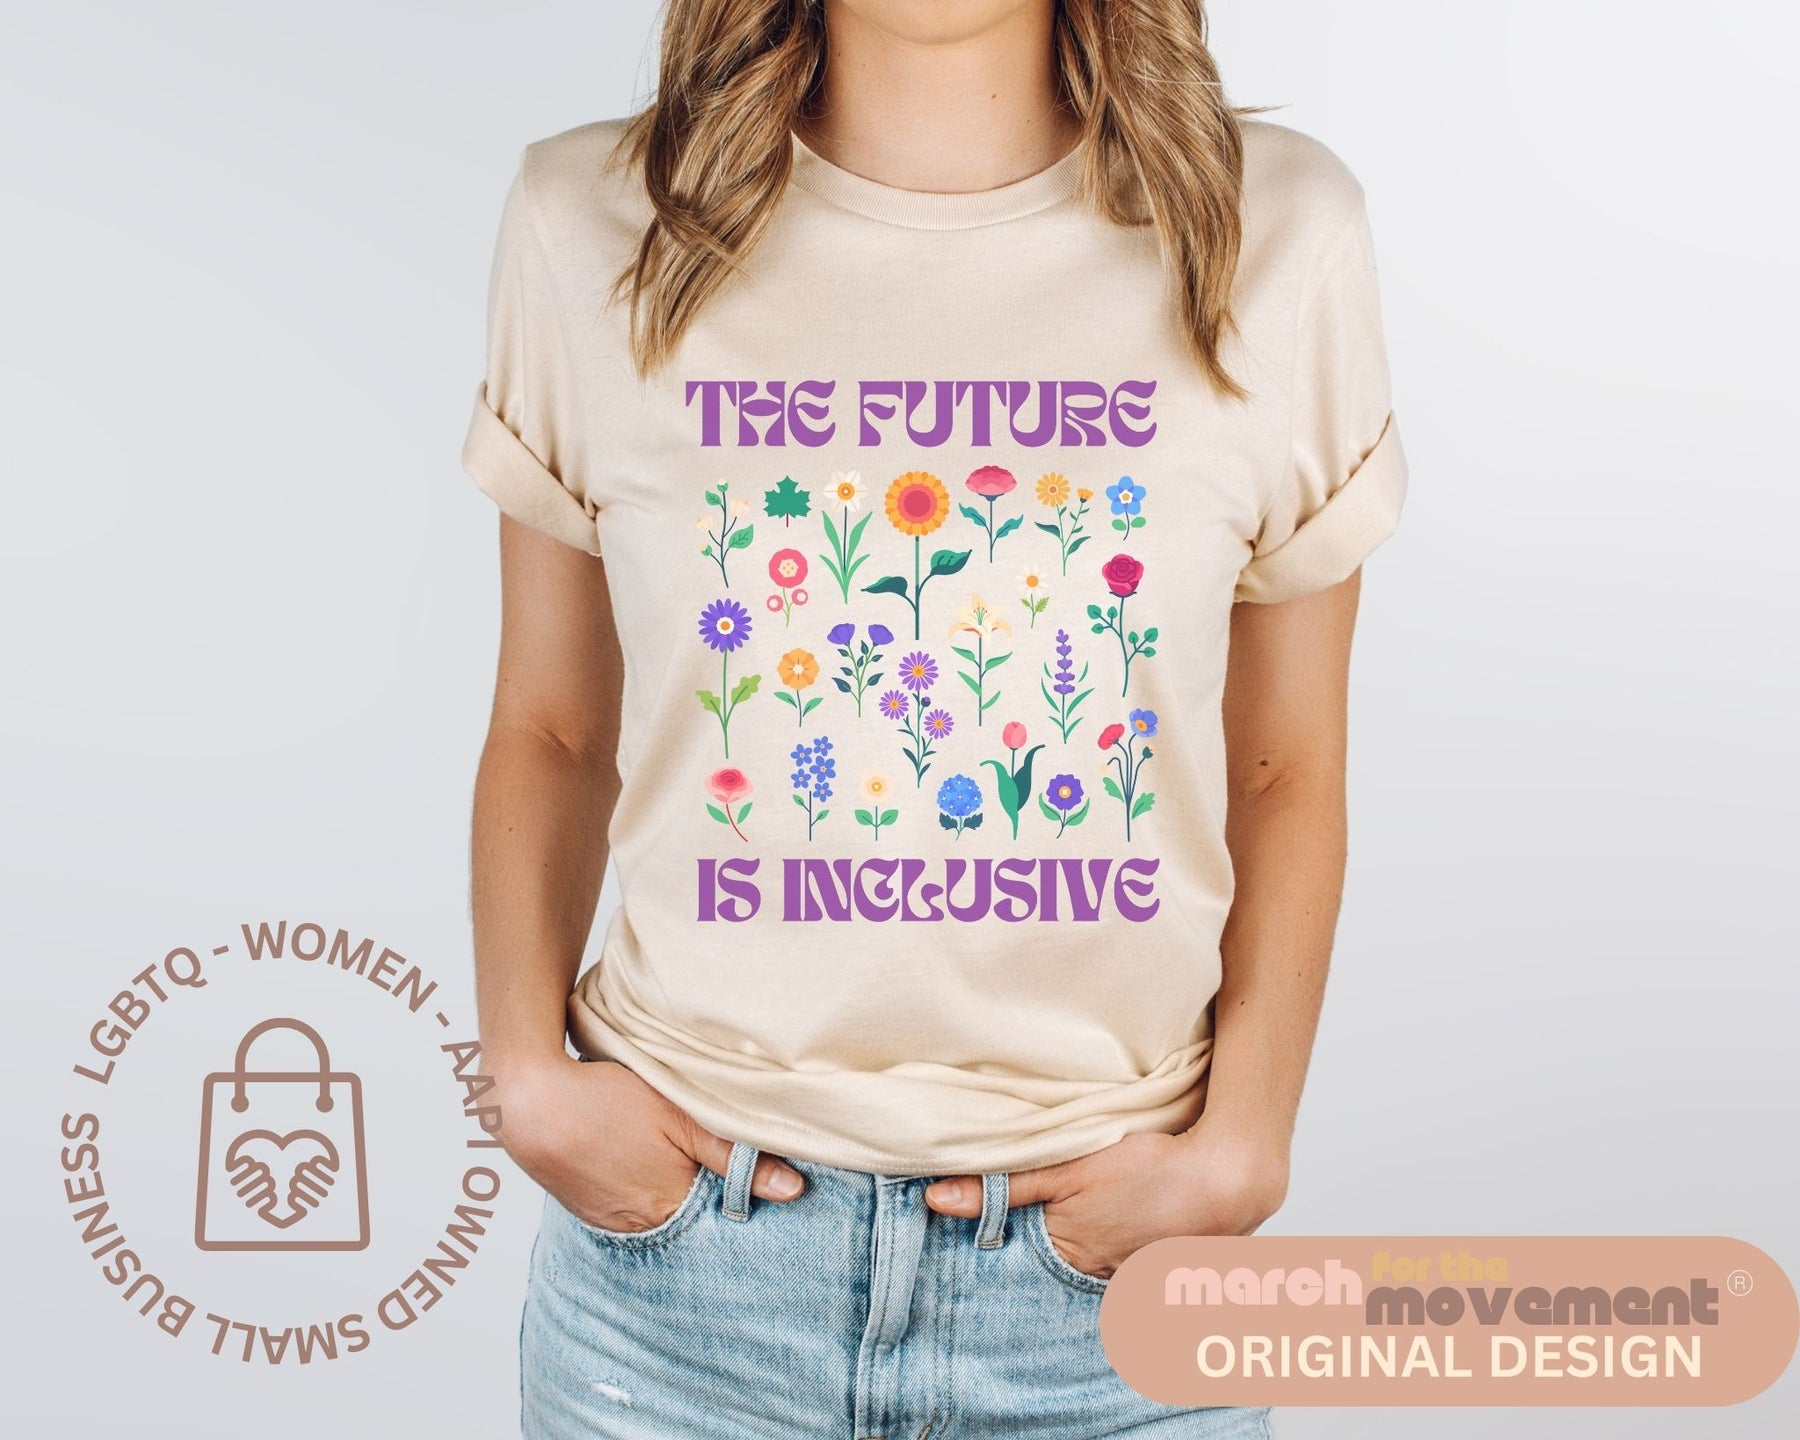 The Future is Inclusive T-Shirt